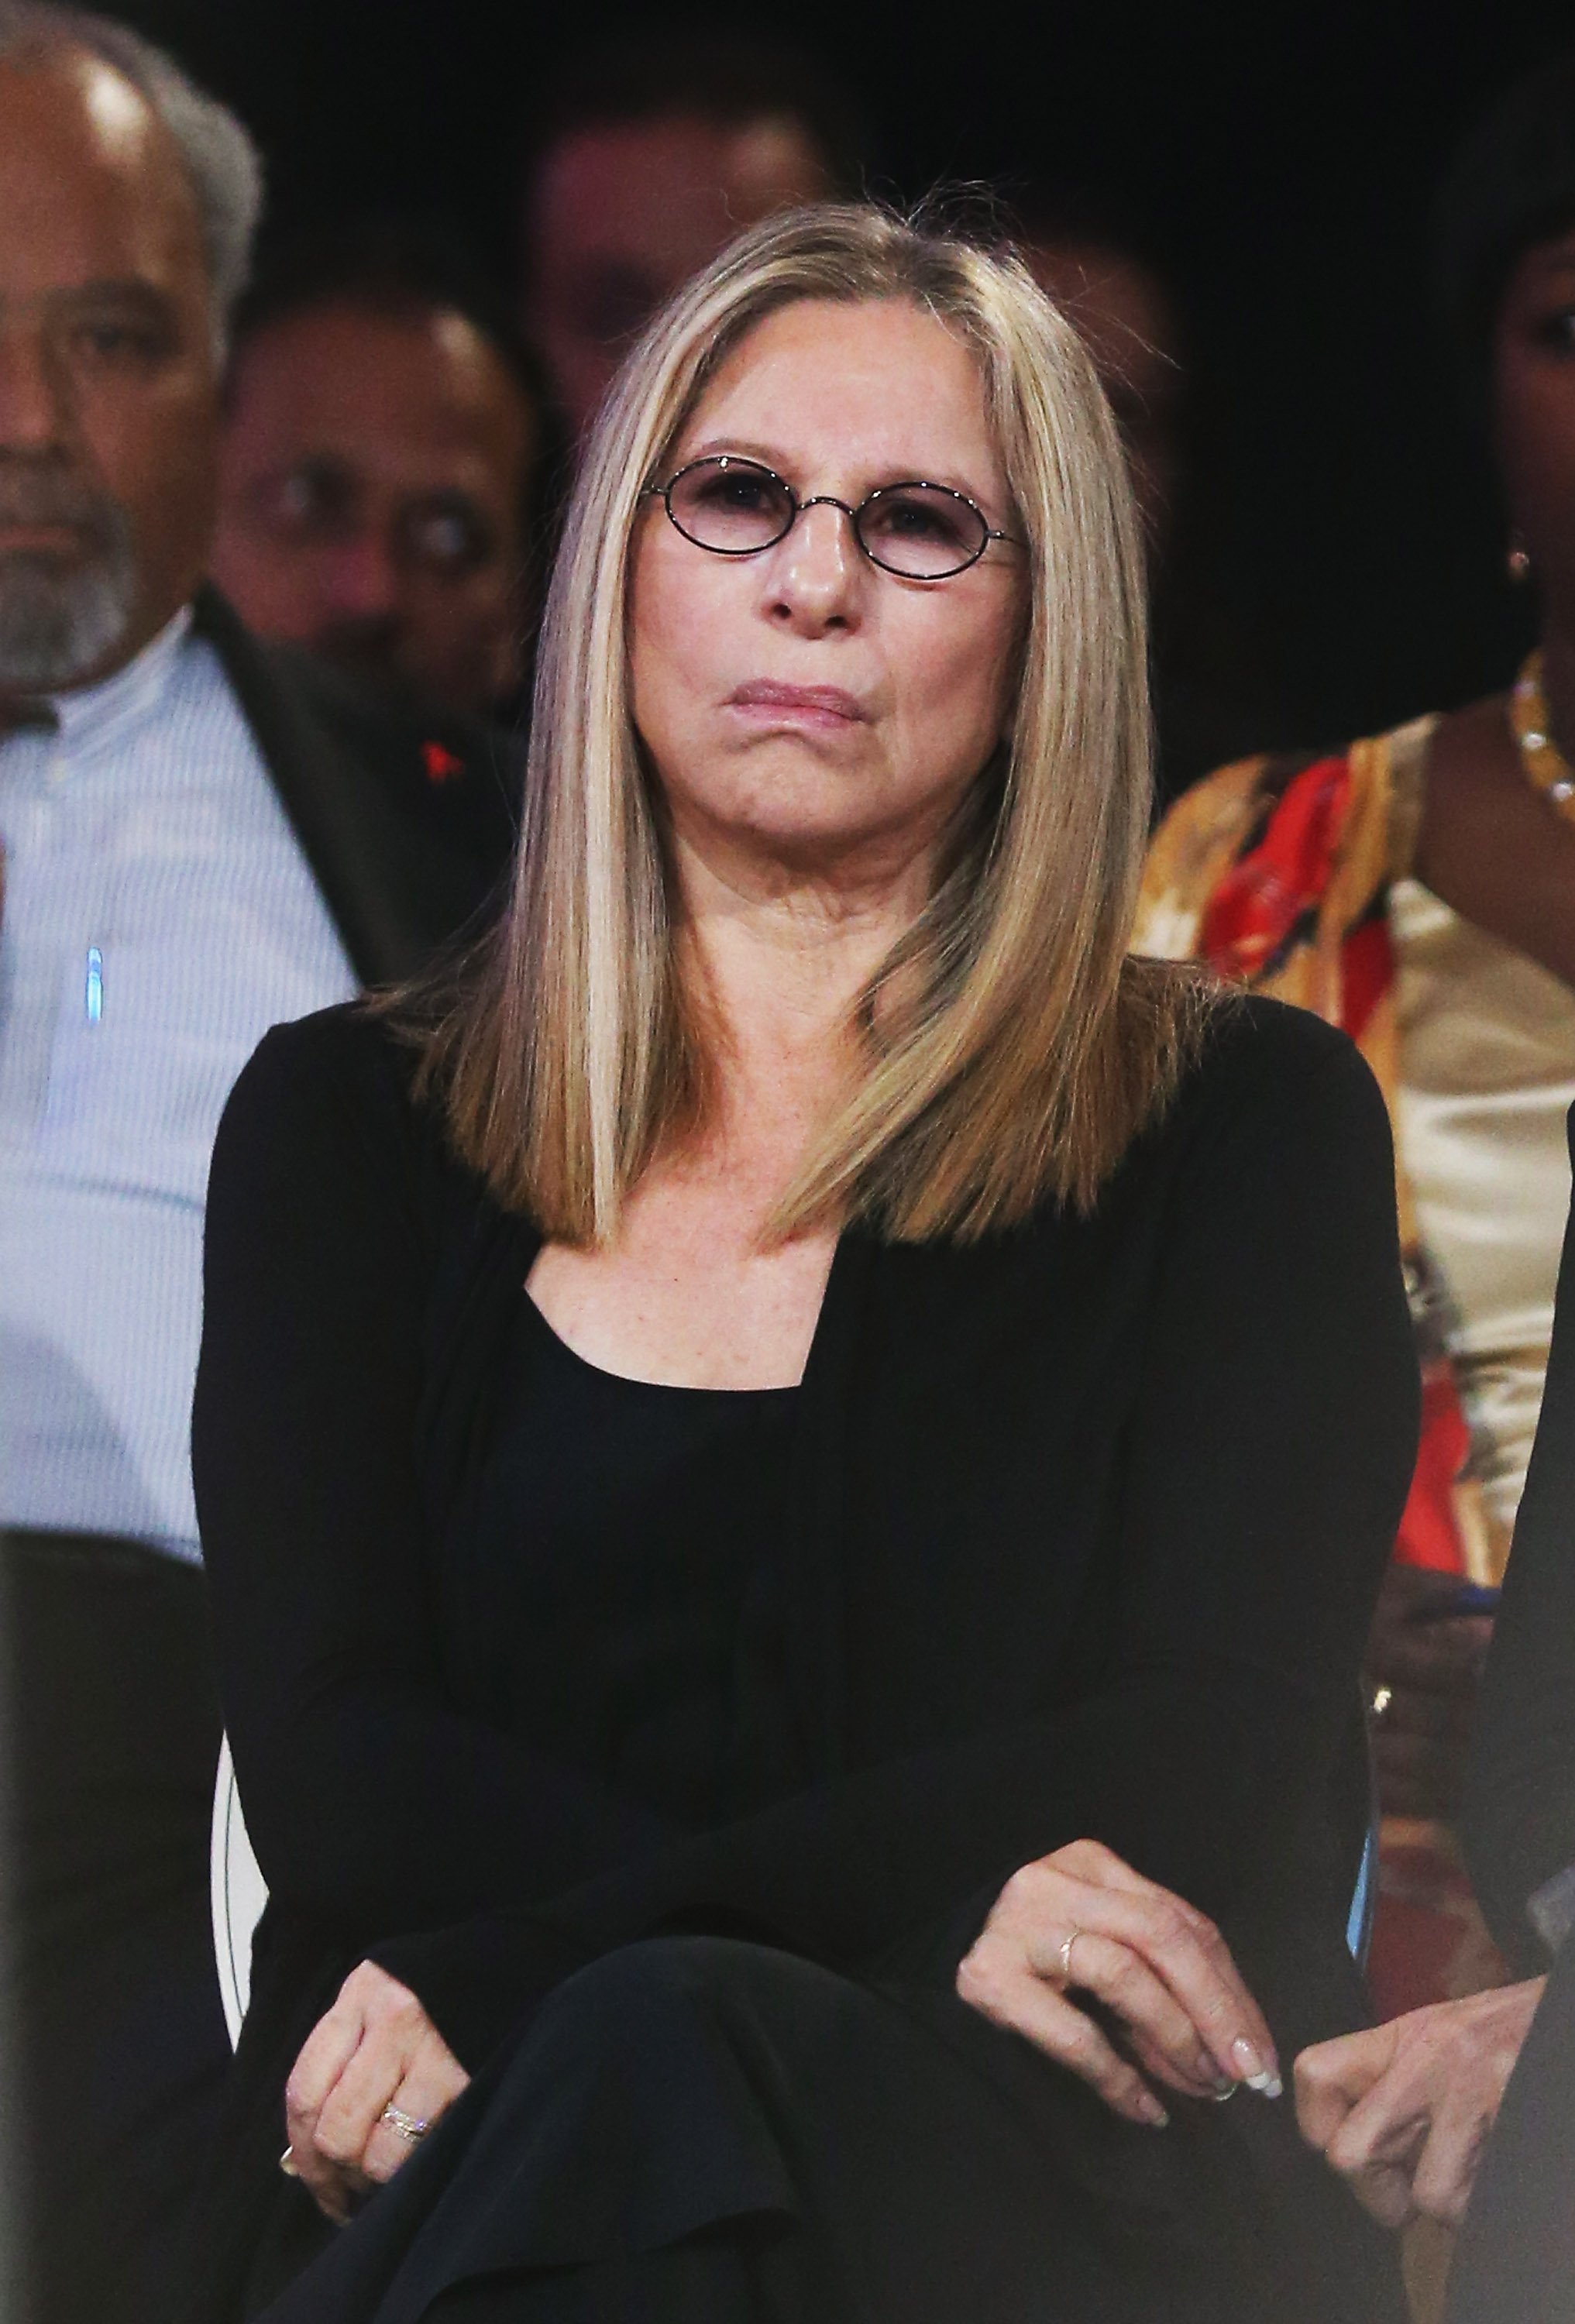 Barbra Streisand at the 2015 Clinton Global Initiative meeting in New York City | Photo: Getty Images